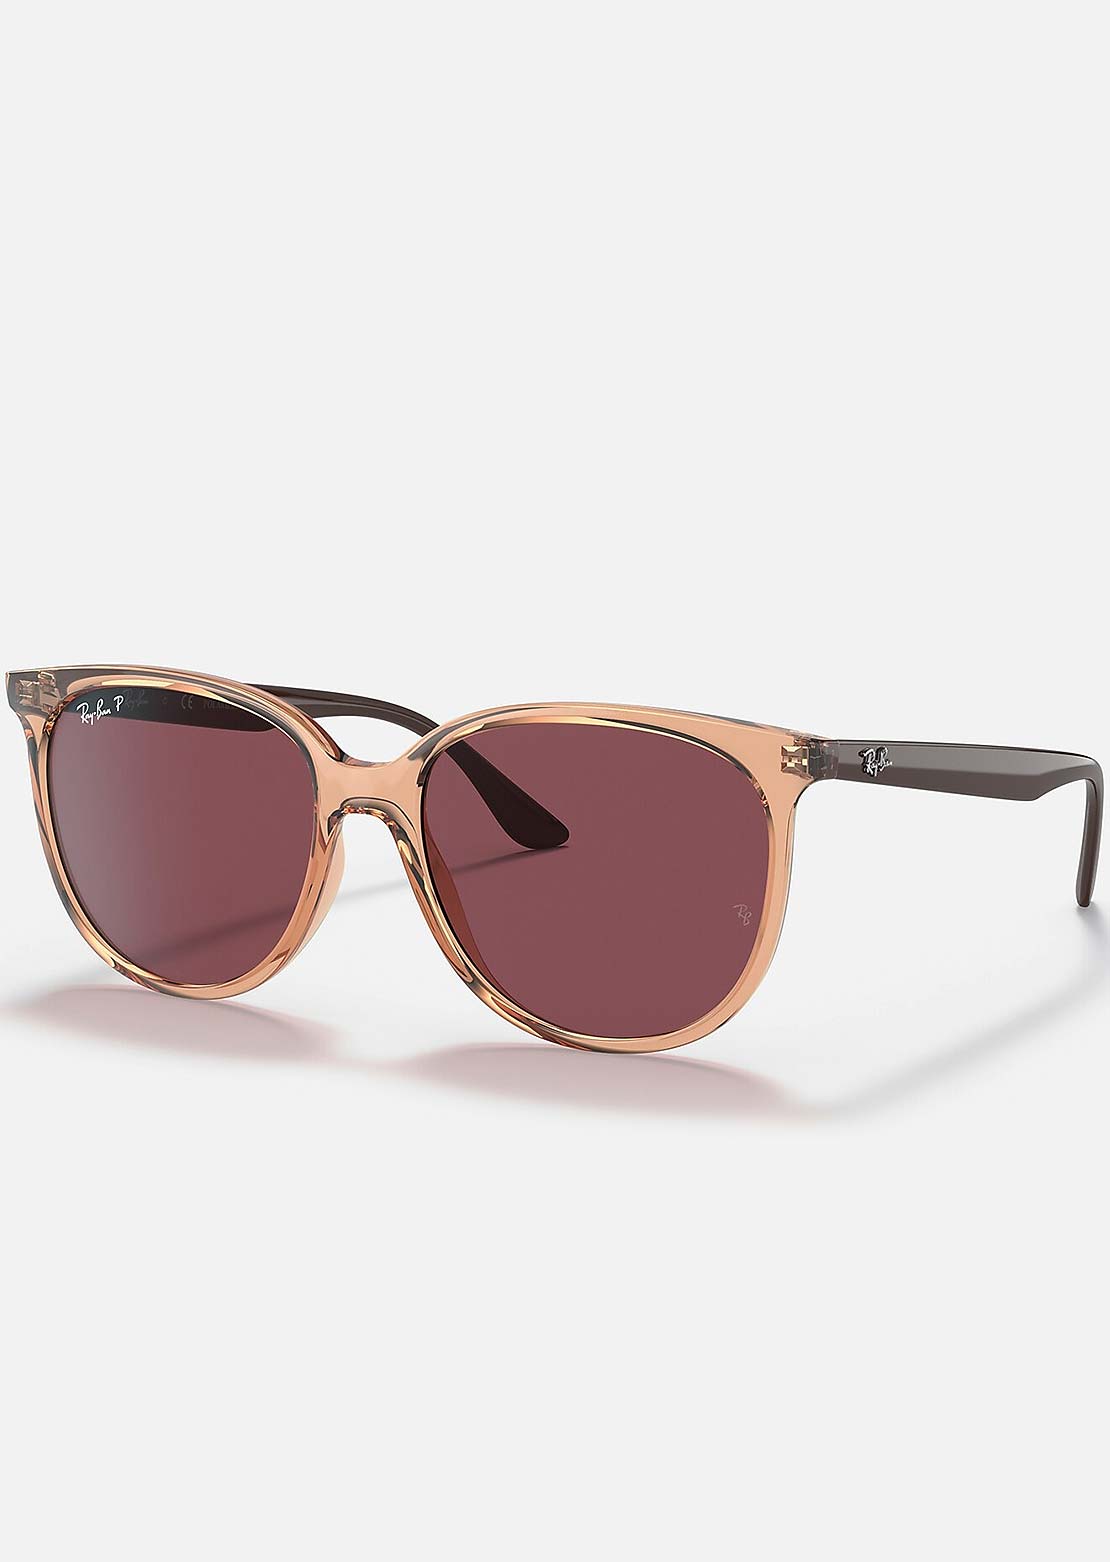 Ray-Ban RB4378 Sunglasses Transparent Brown